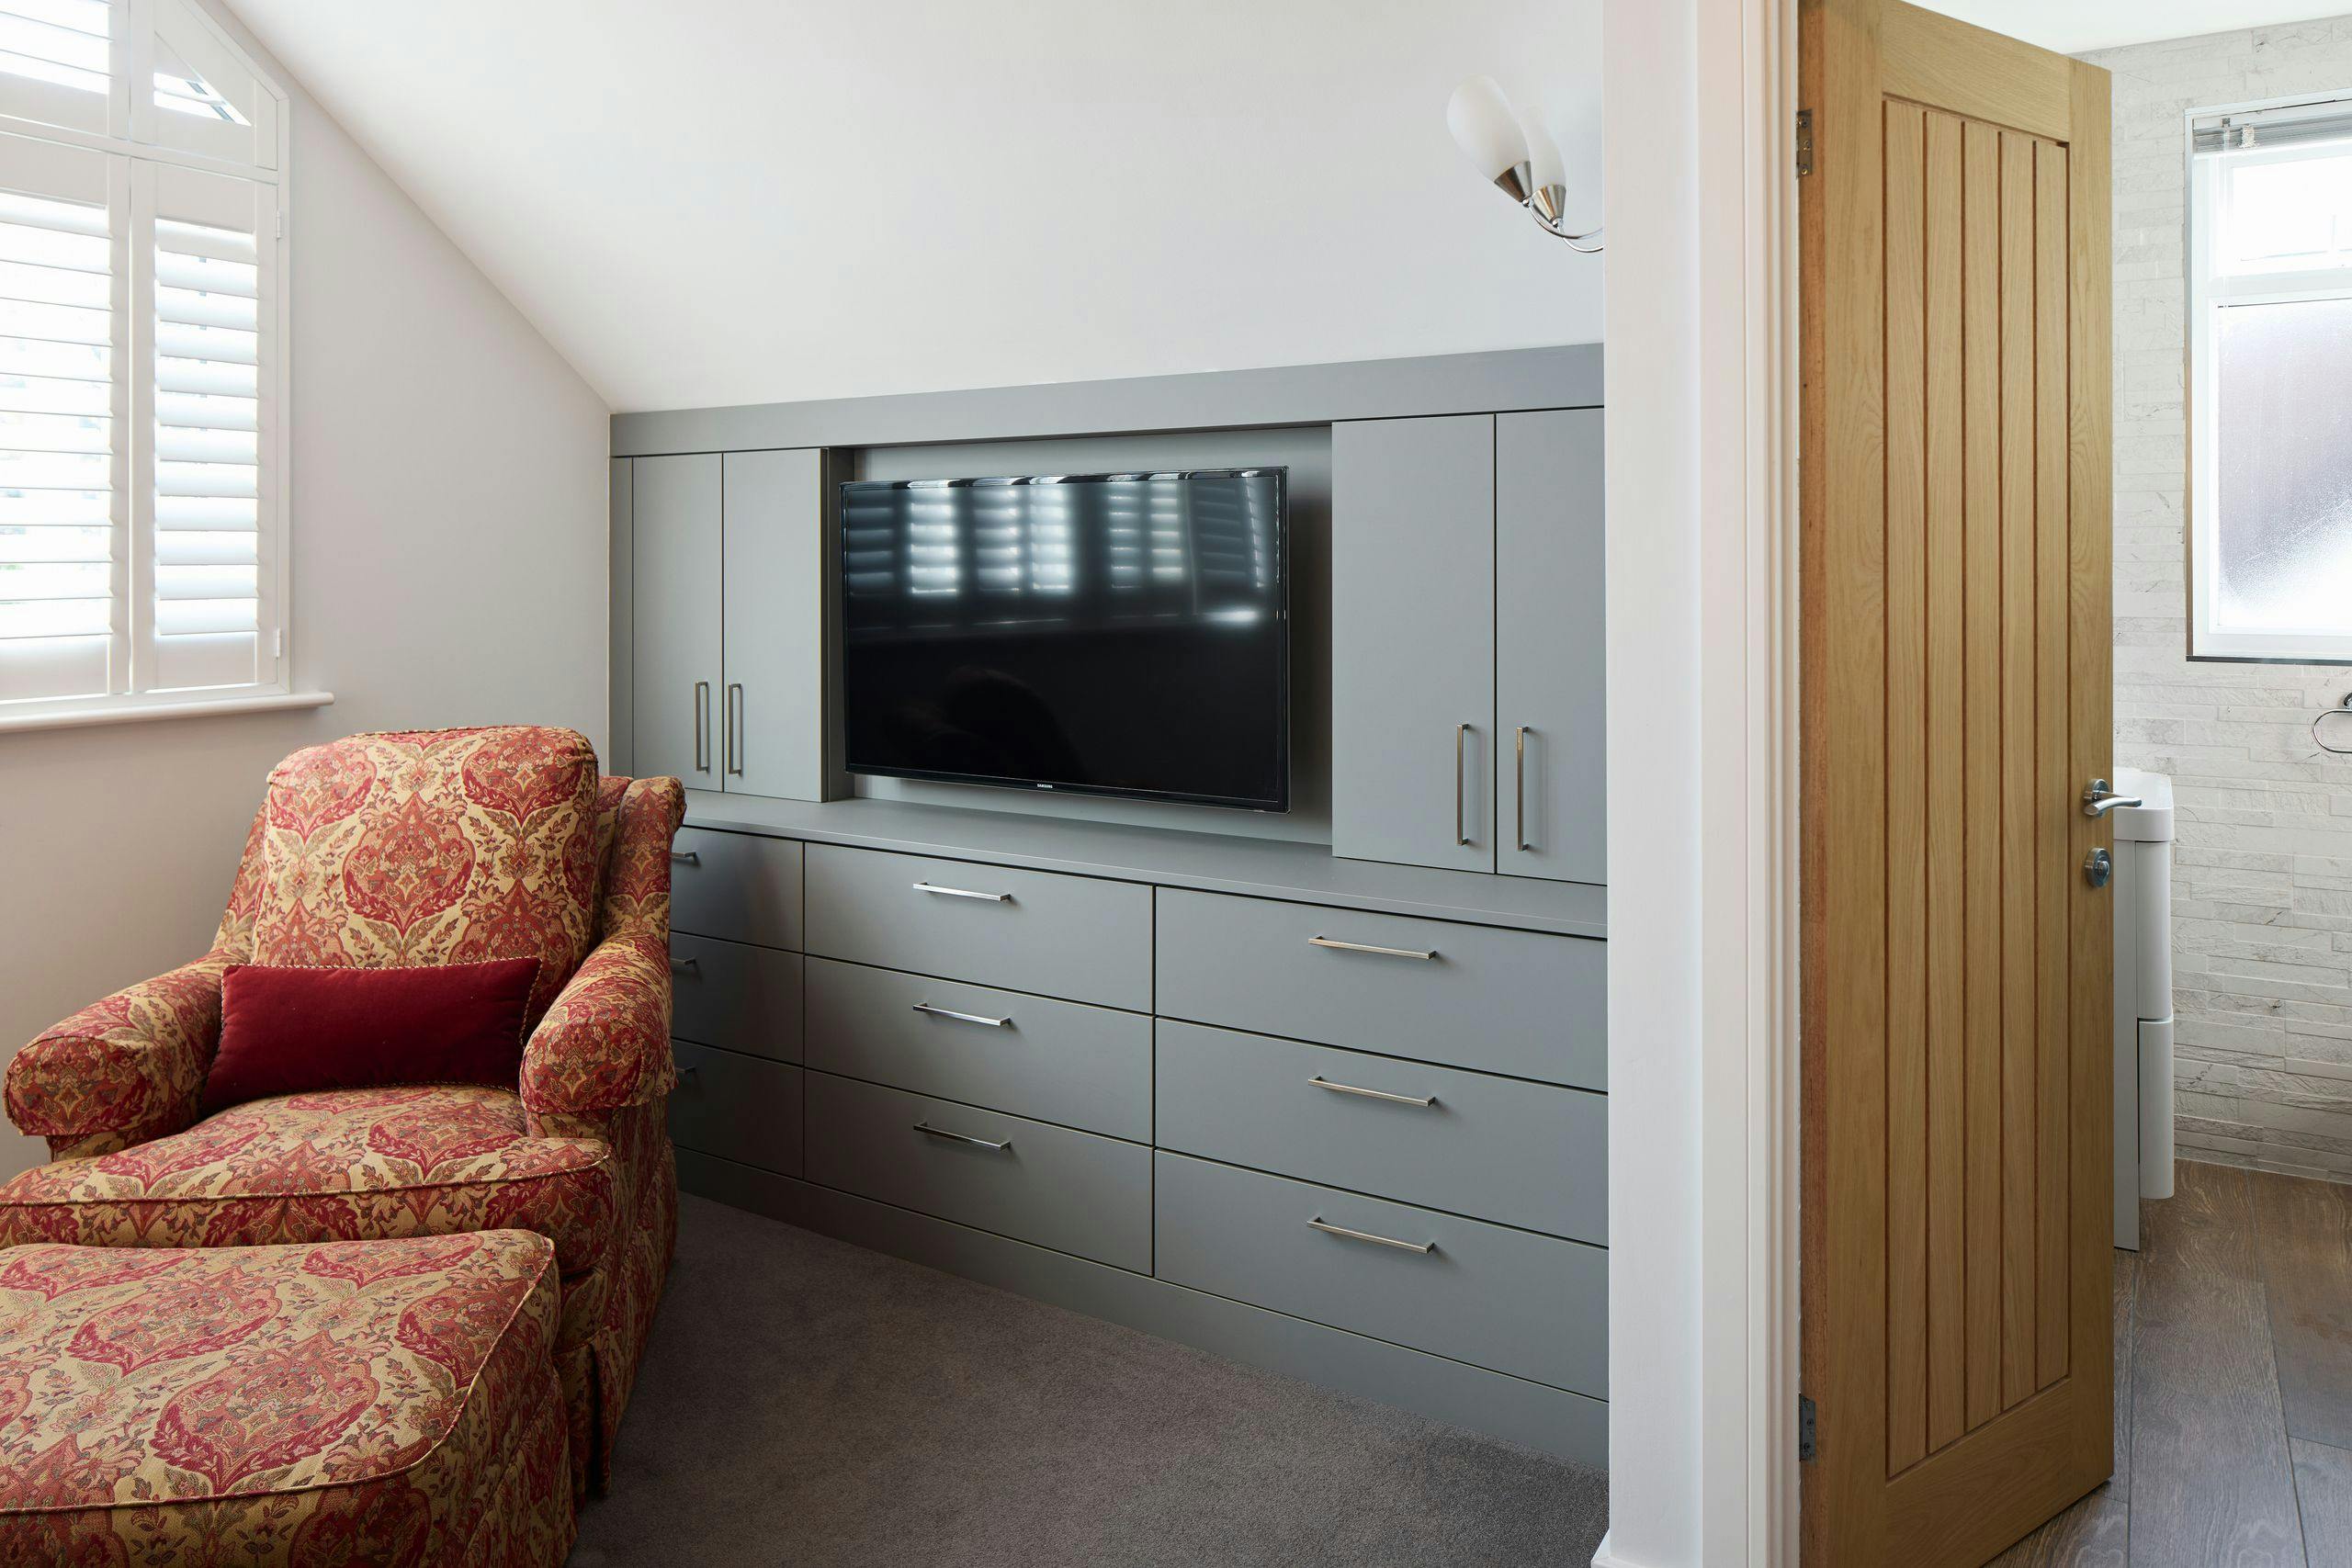 Fitted bedroom furniture with drawers, cupboards and integrated TV mount